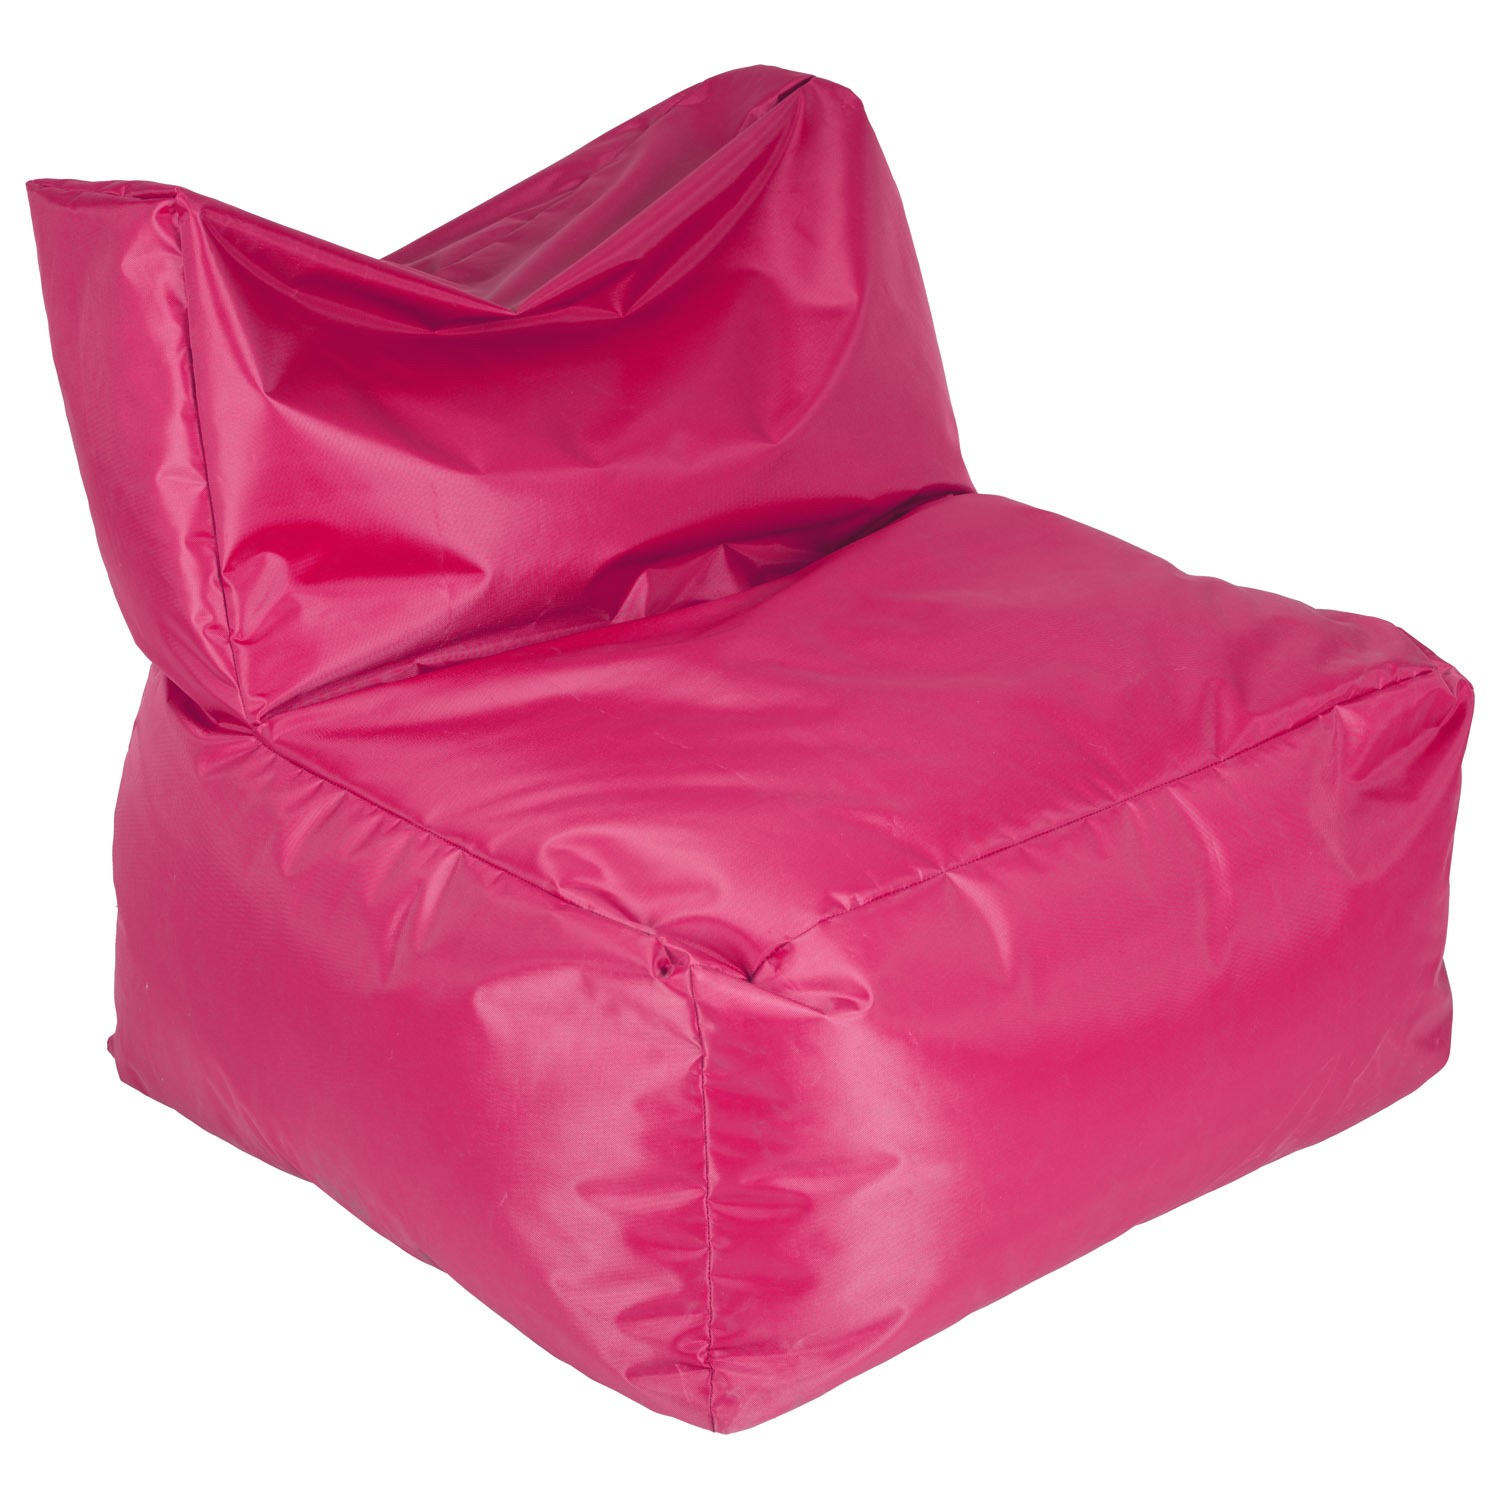 Read more about Pink outdoor water resistant bean bag chair como